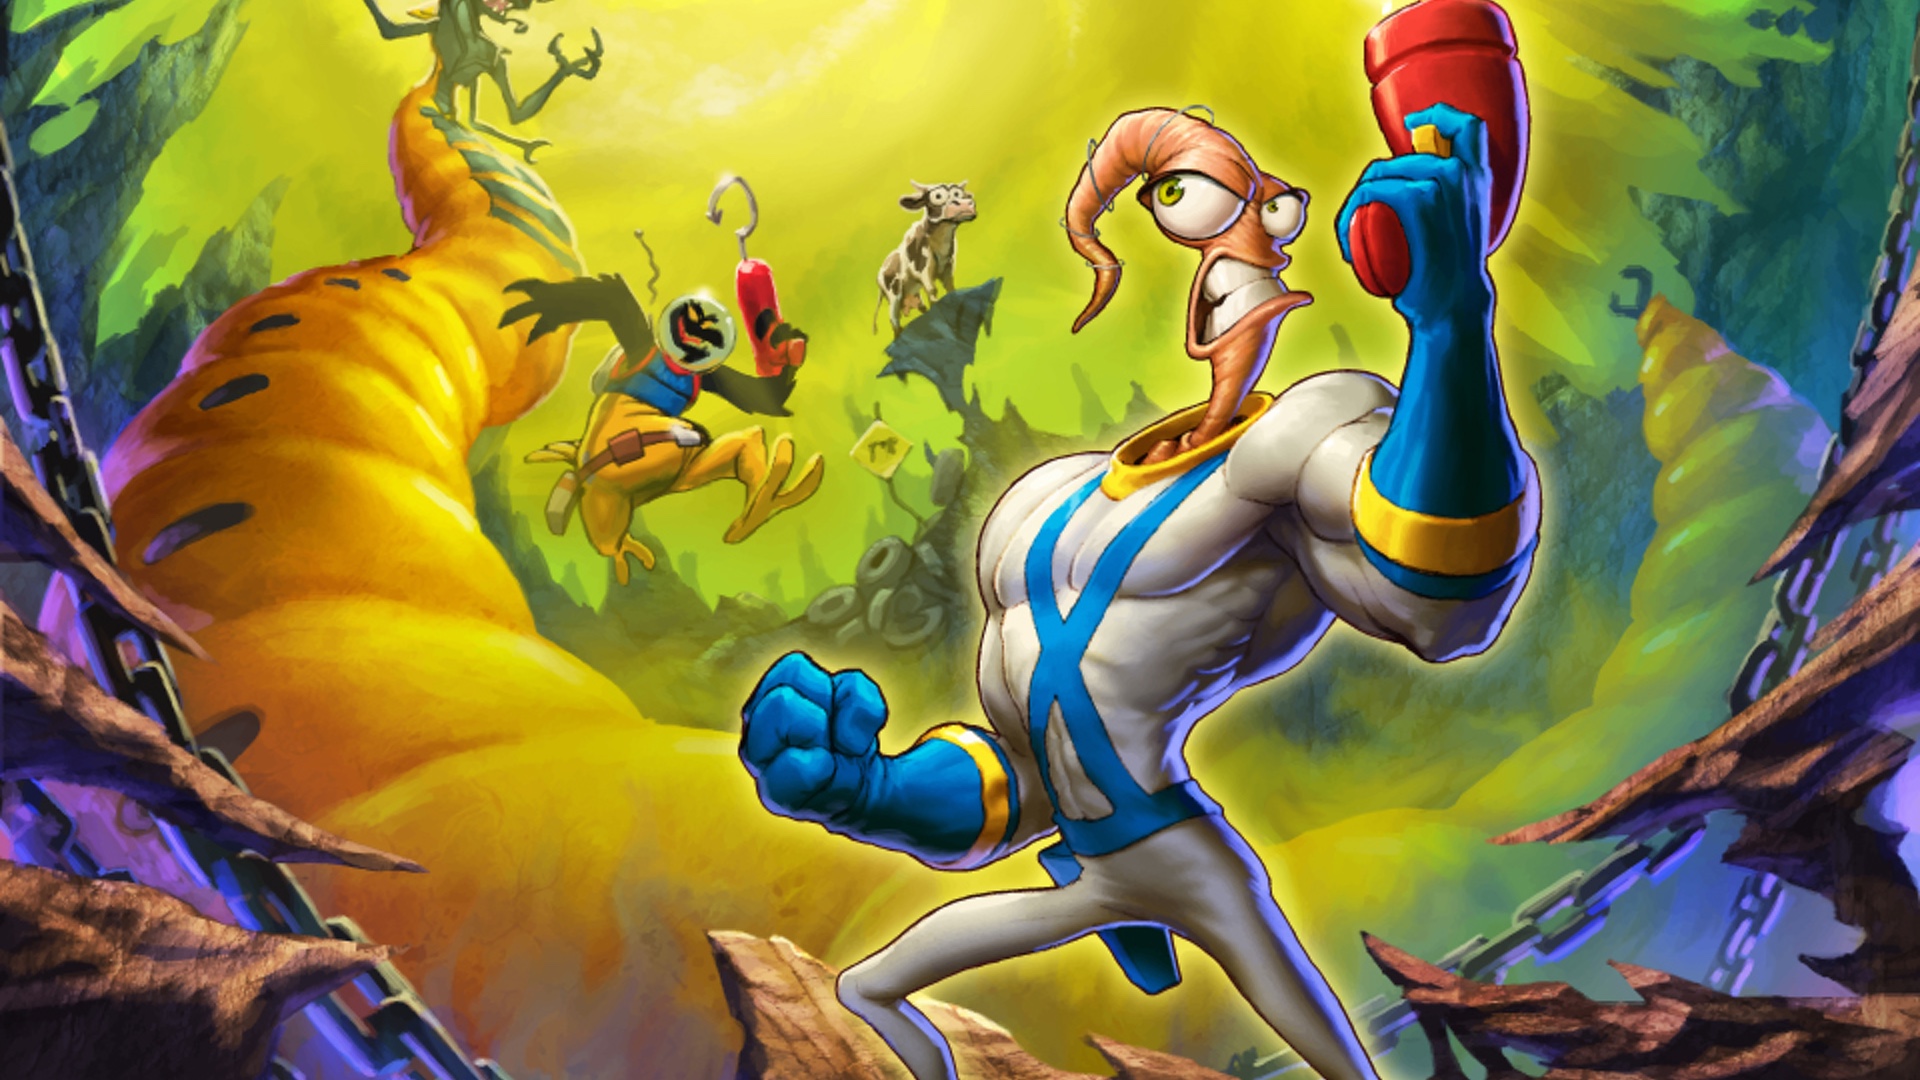 A New Earthworm Jim Game Is In Development With The Original Creative Team And Some Designs Have Been Teased Geektyrant